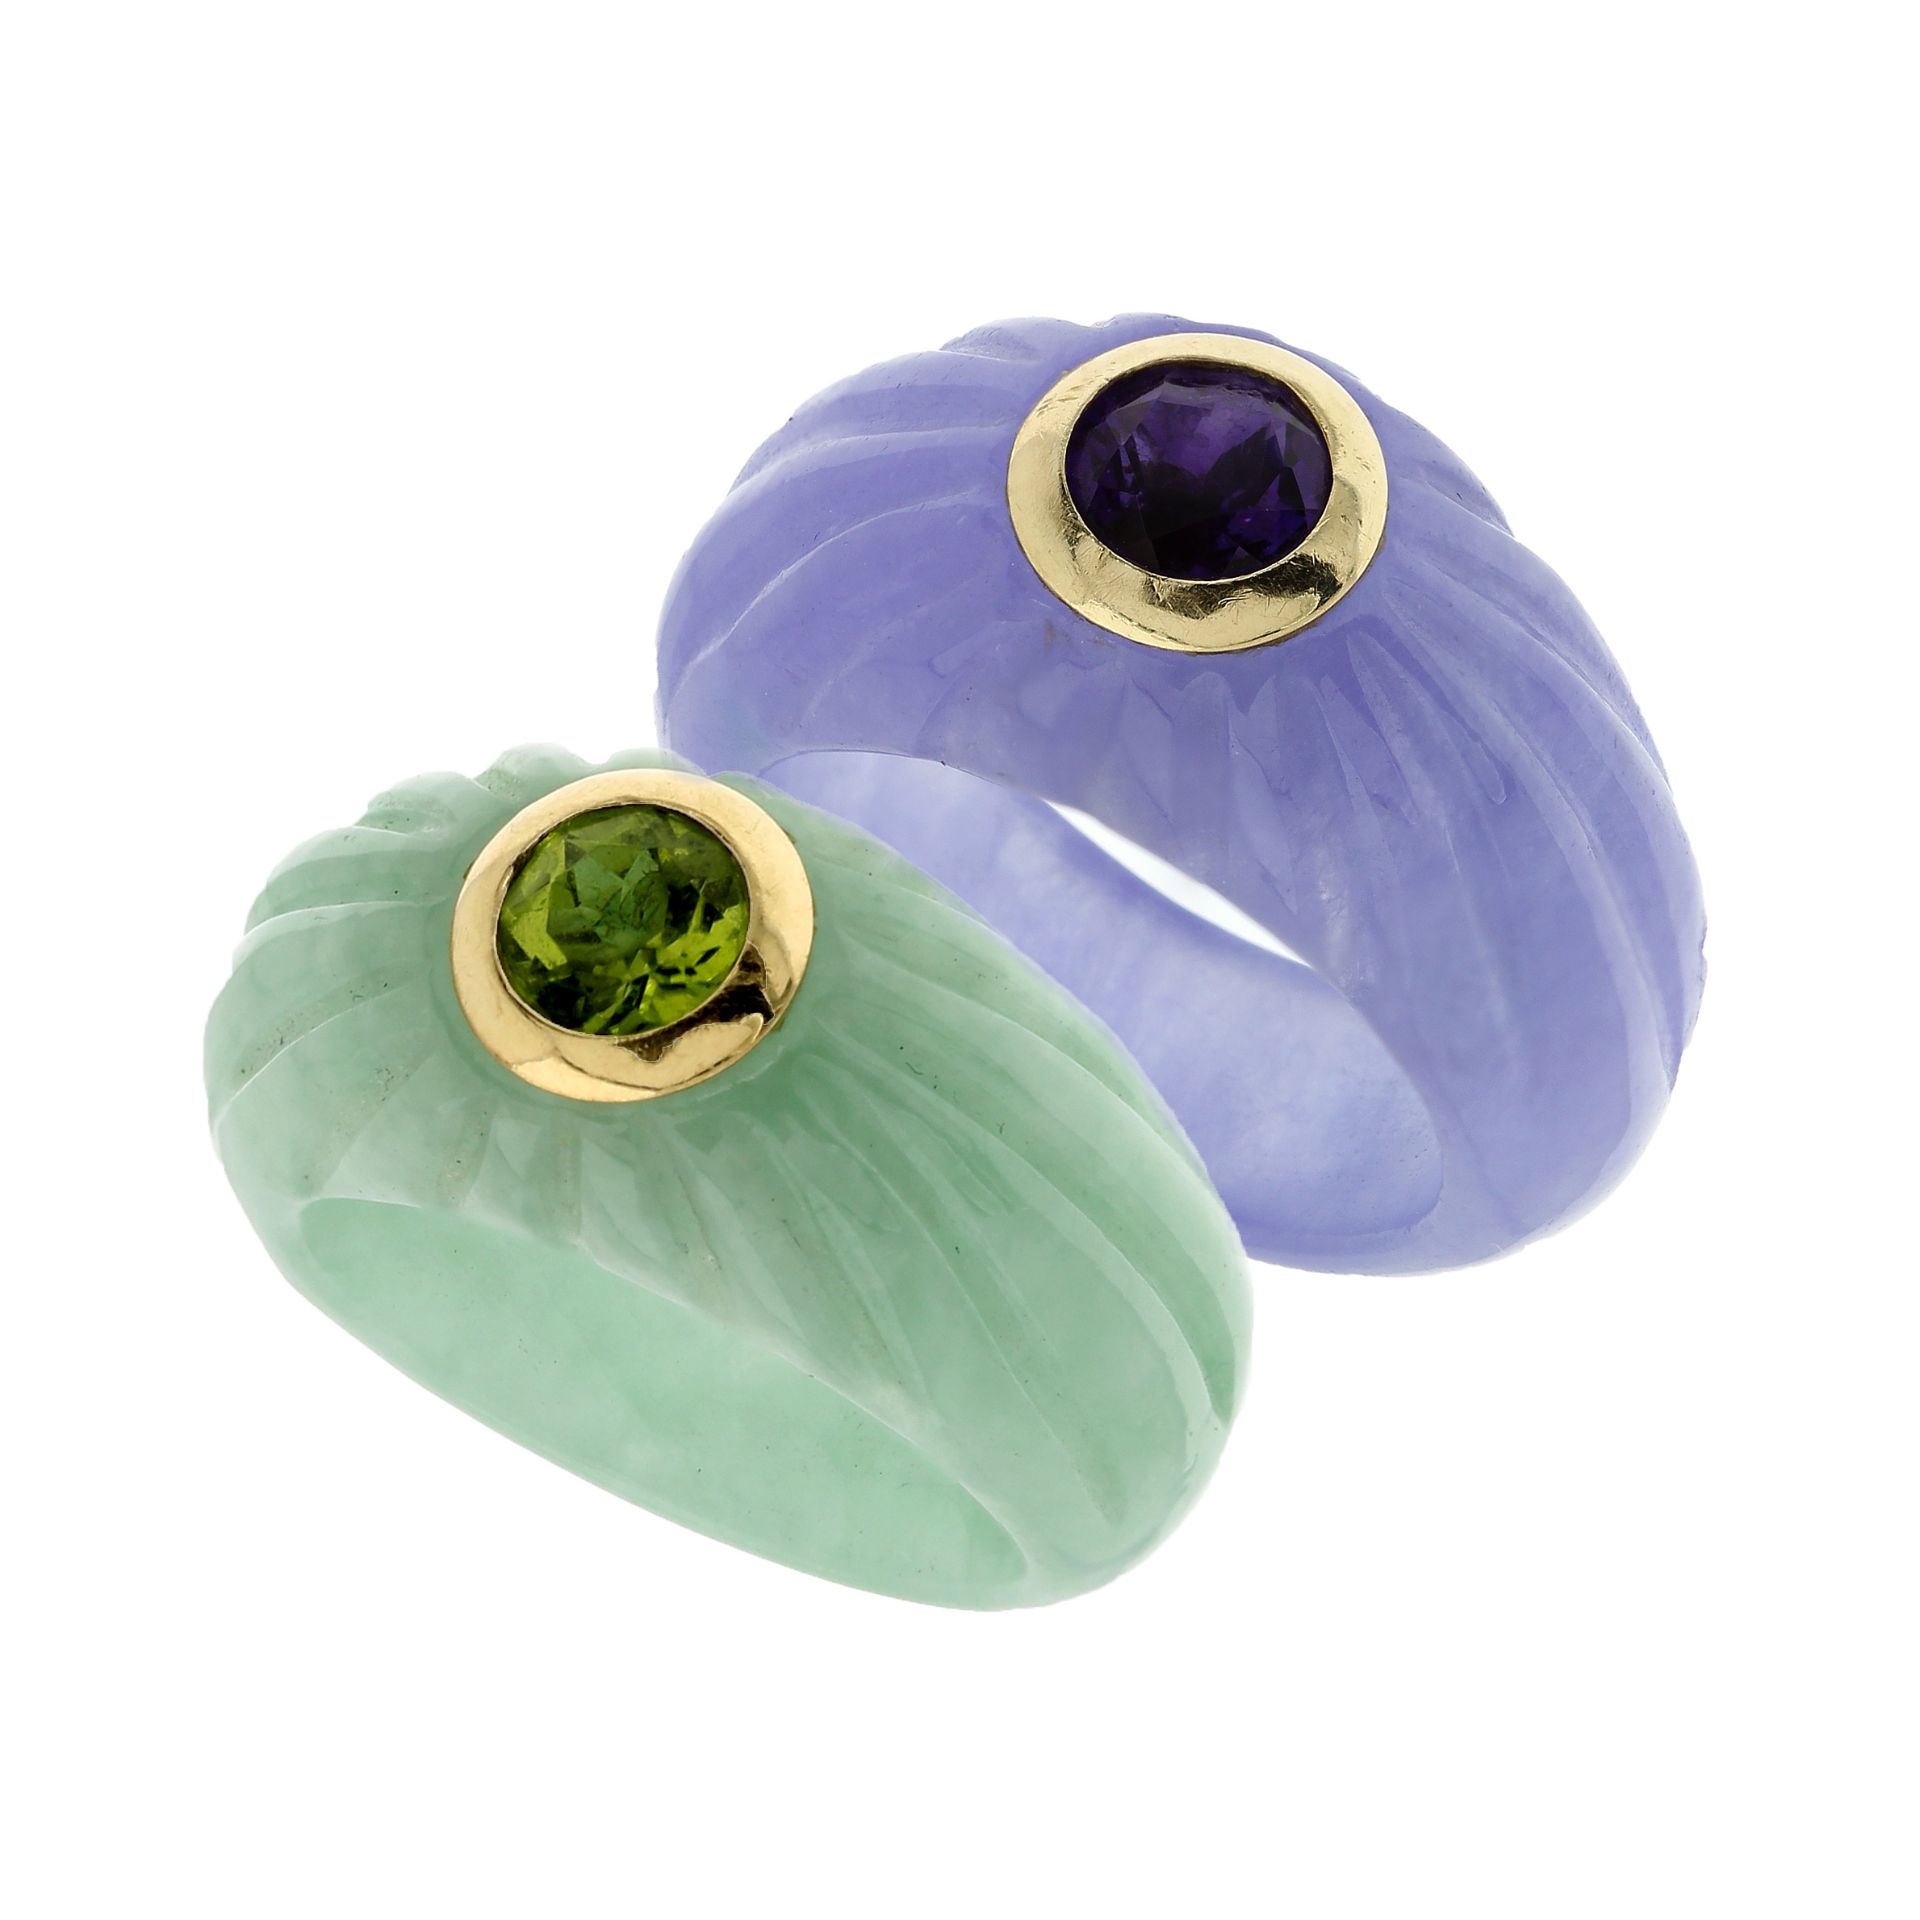 A PAIR OF JADE, PERIDOT AND AMETHYST DRESS RINGS in 14ct yellow gold, each ring carved in jade,